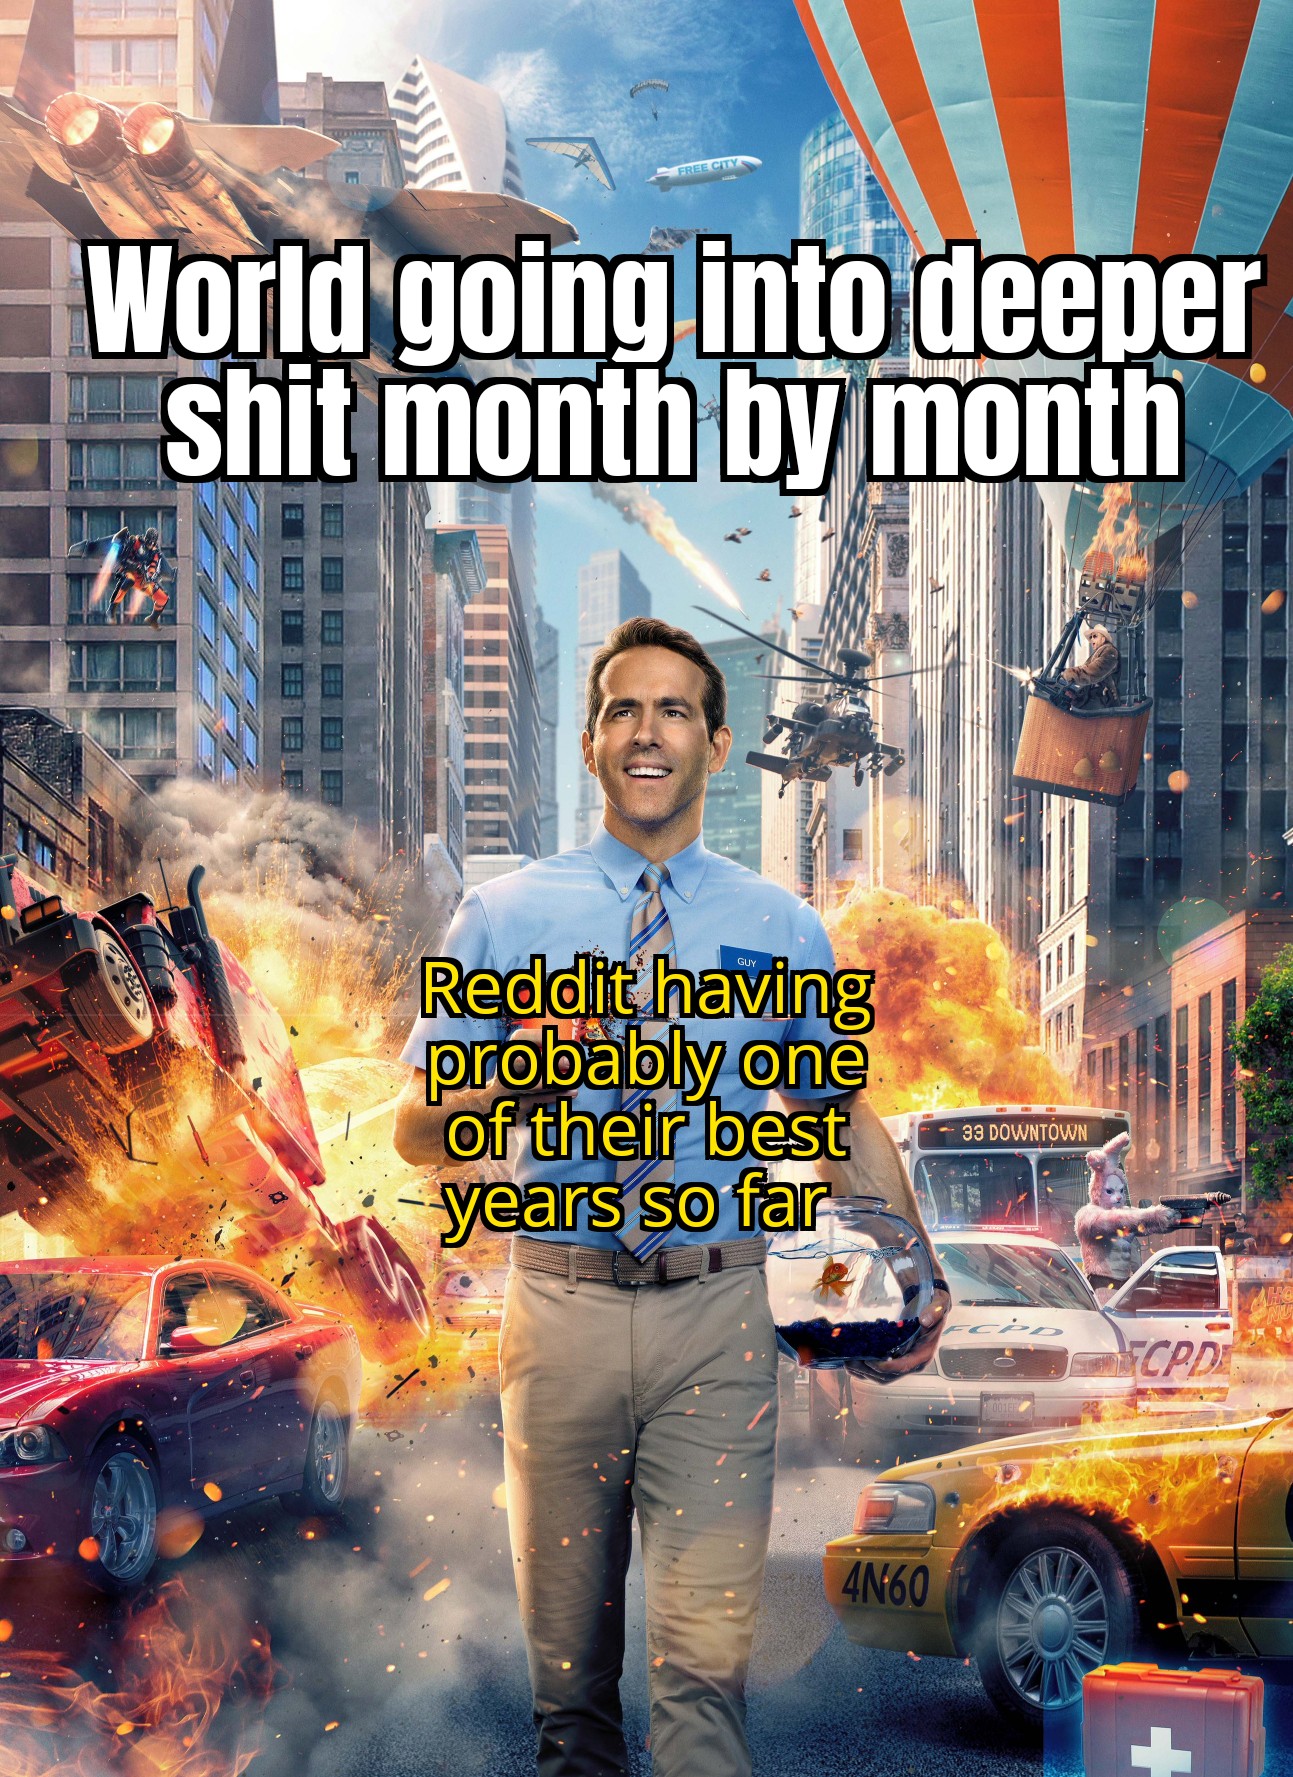 Funny, Reddit, TikTok, USA, This Is Patrick, Ryan Reynolds other memes Funny, Reddit, TikTok, USA, This Is Patrick, Ryan Reynolds text: World golpwinto deeoer snit month by month Reddit having probably onß of their-best 33 DOWNTOWN years so fae 4M60 